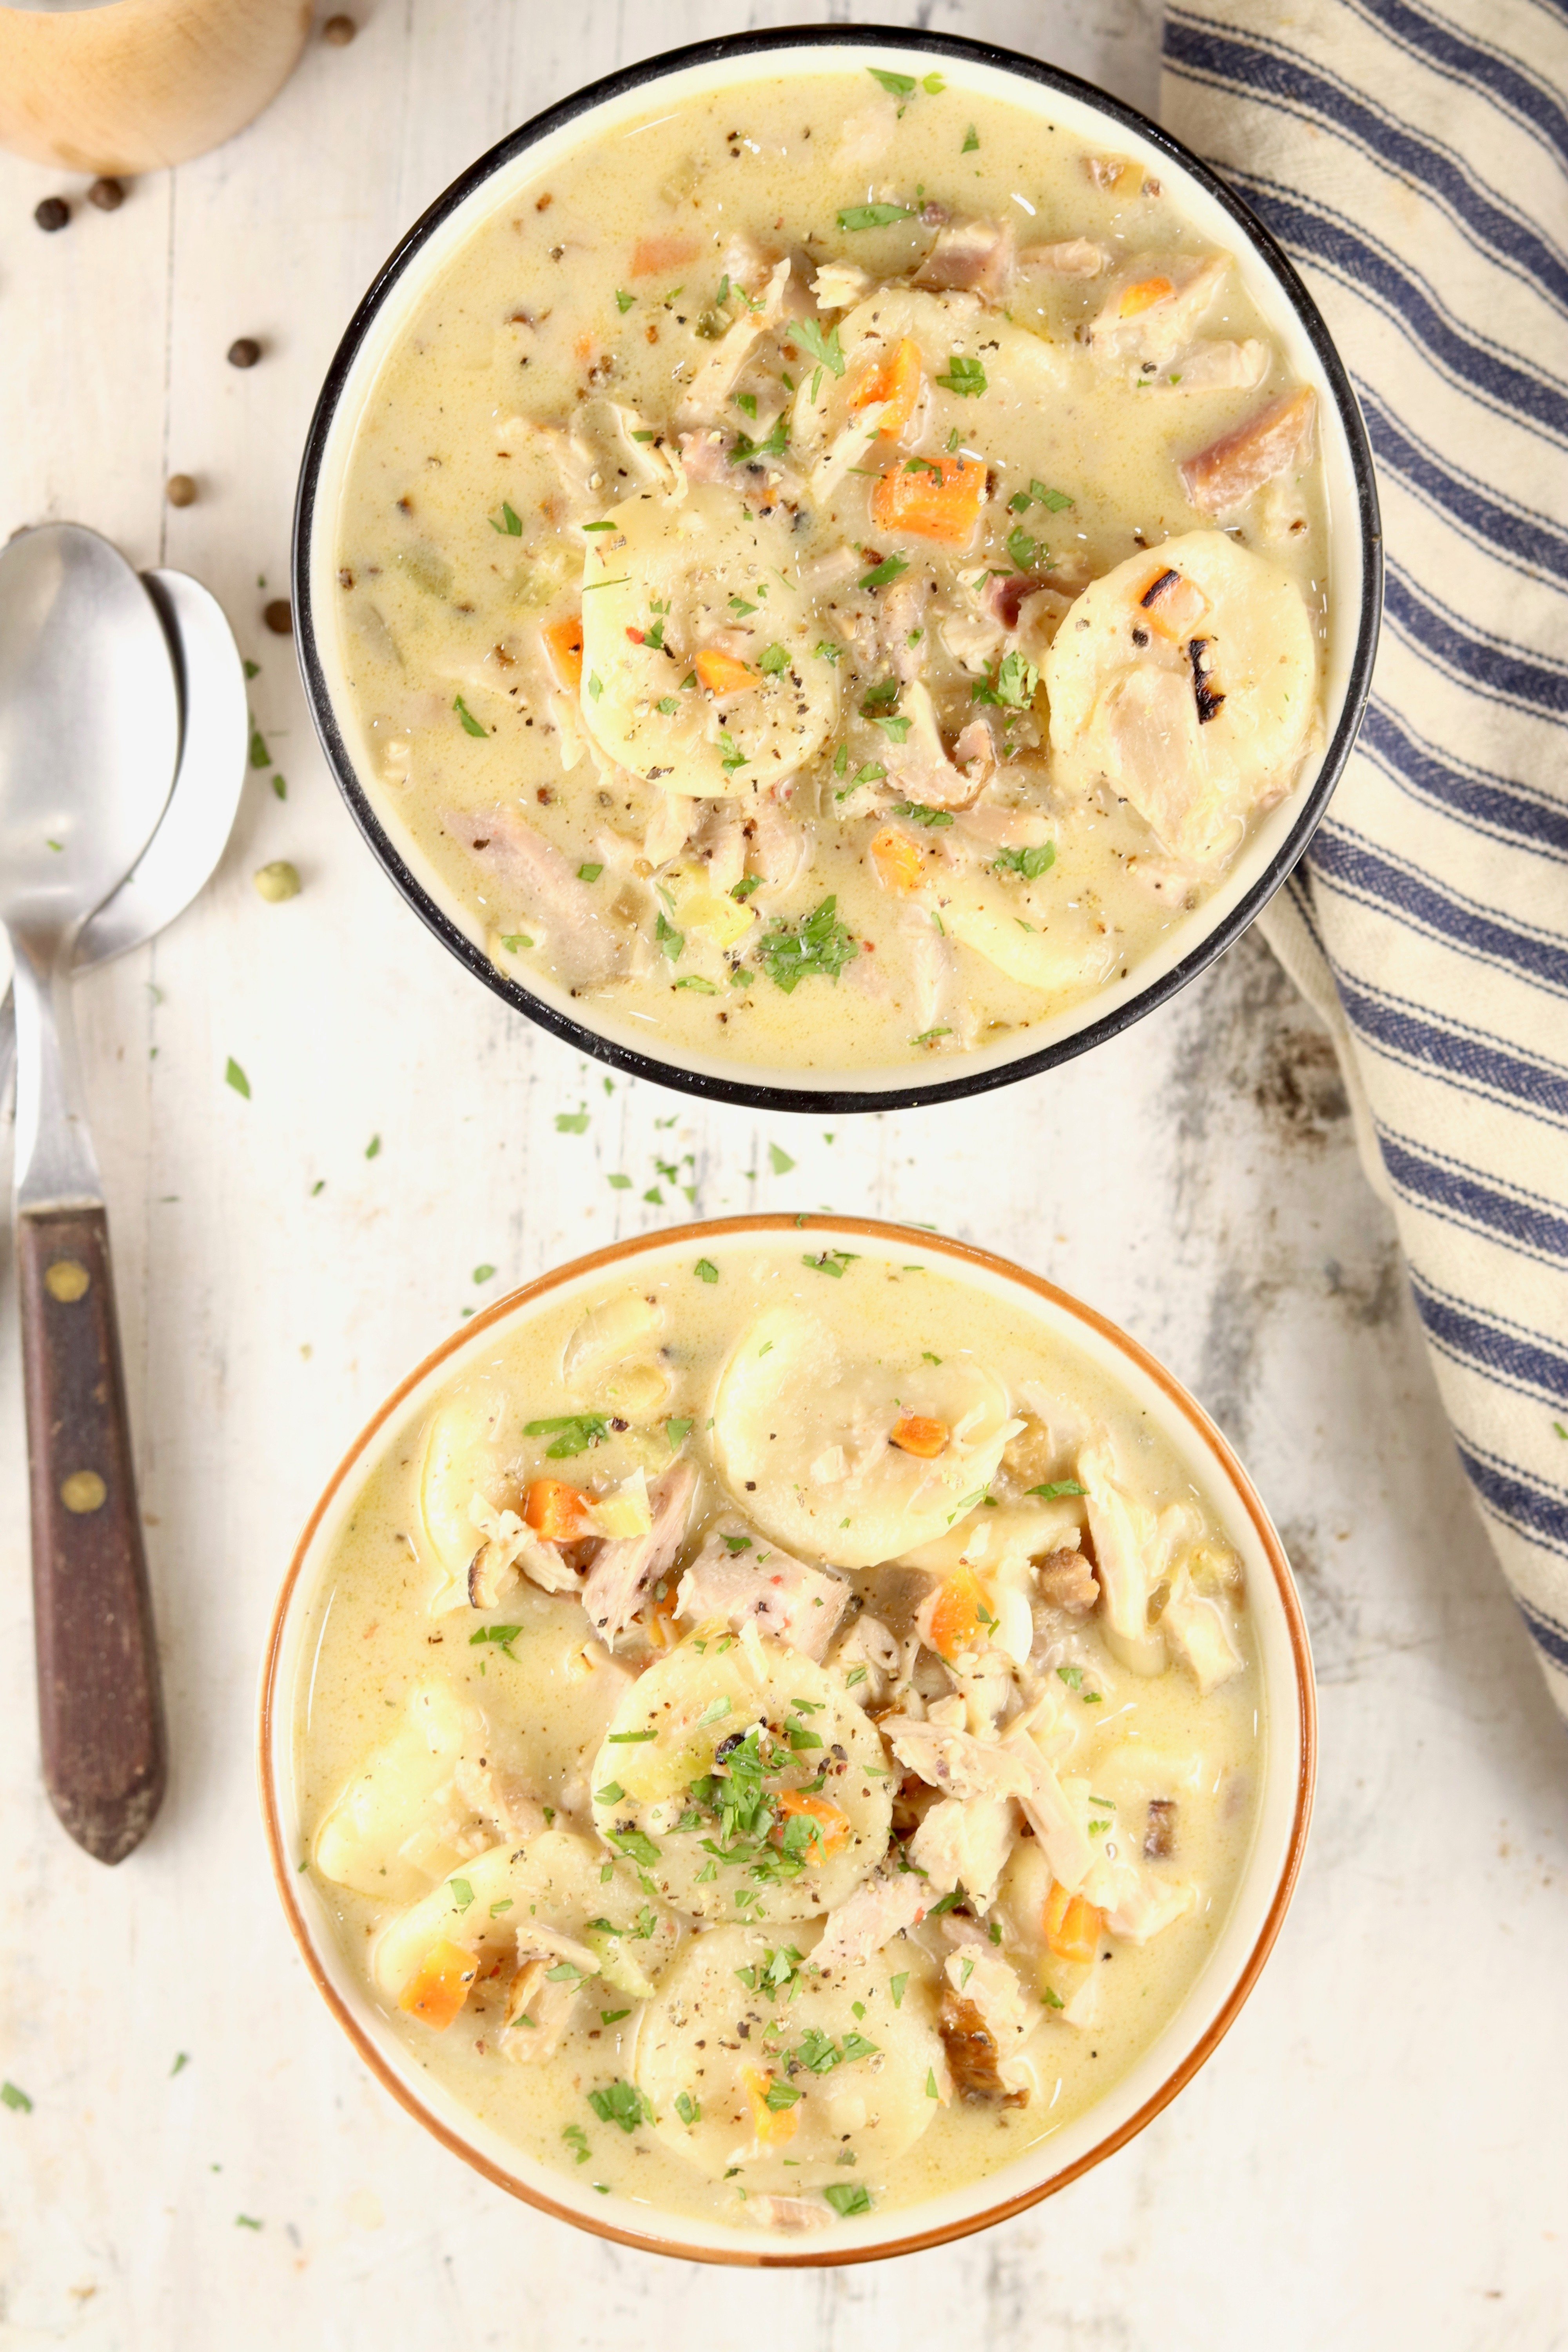 Two bowls homemade dumplings with turkey, carrots and celery